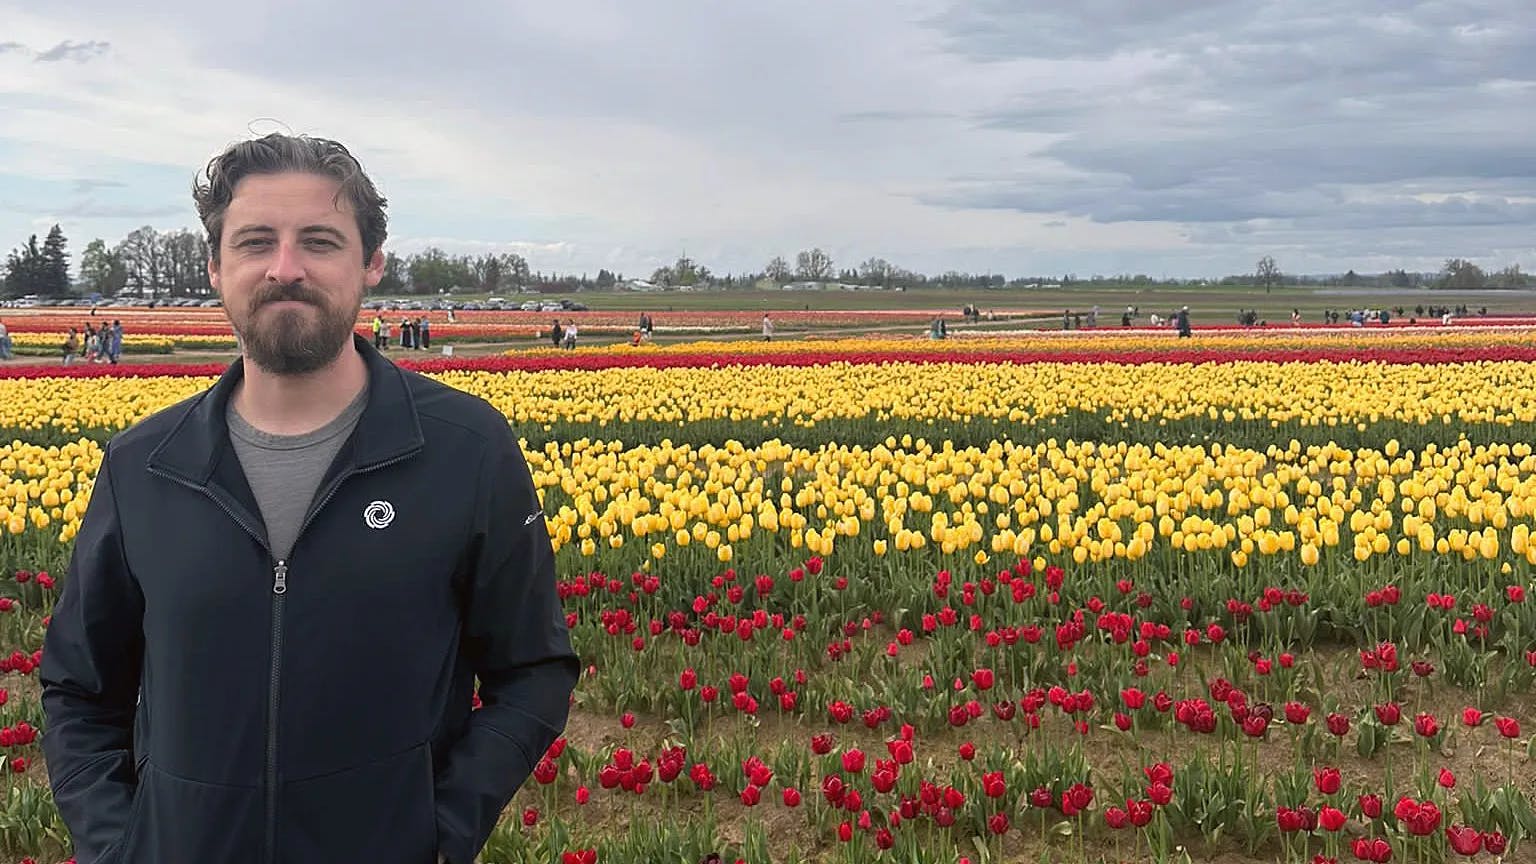 Zac has just discovered there is a tulip festival in Oregon. He's not sure how he feels about it.